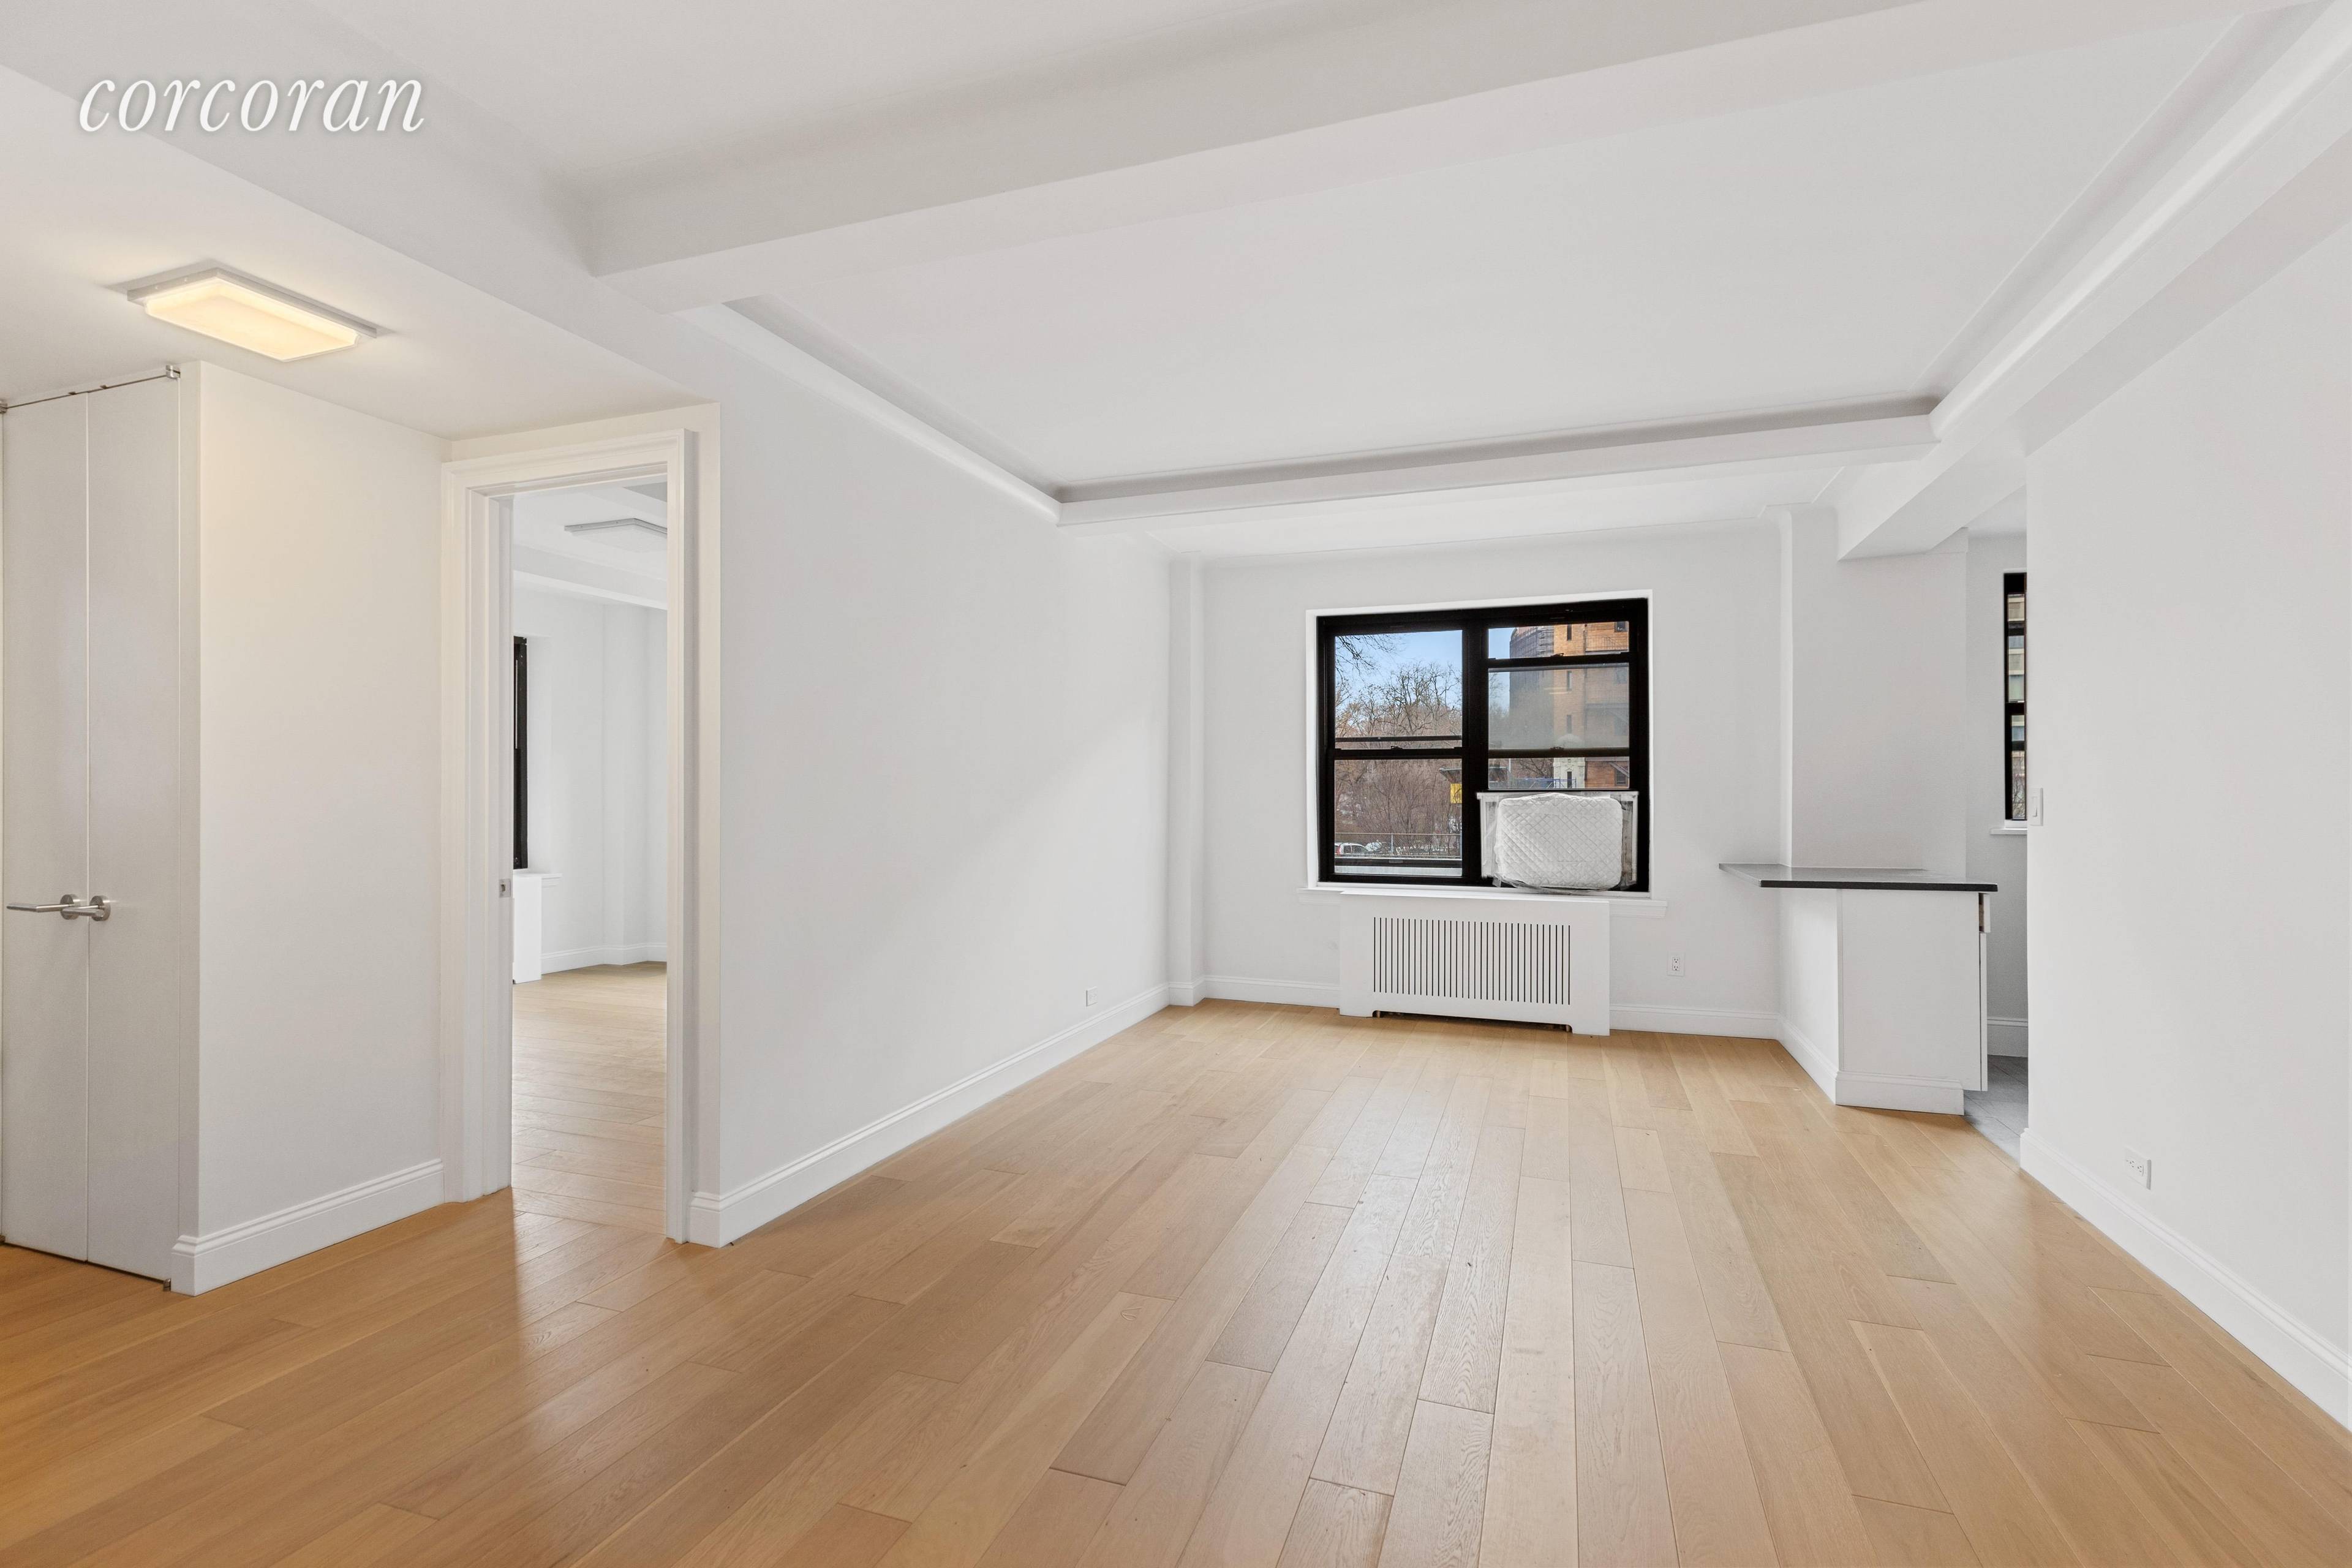 NO FEE Price reduction Be the first to live in this newly renovated 2 bedroom 1 bath home in a luxury condominium in the perfect UWS location.